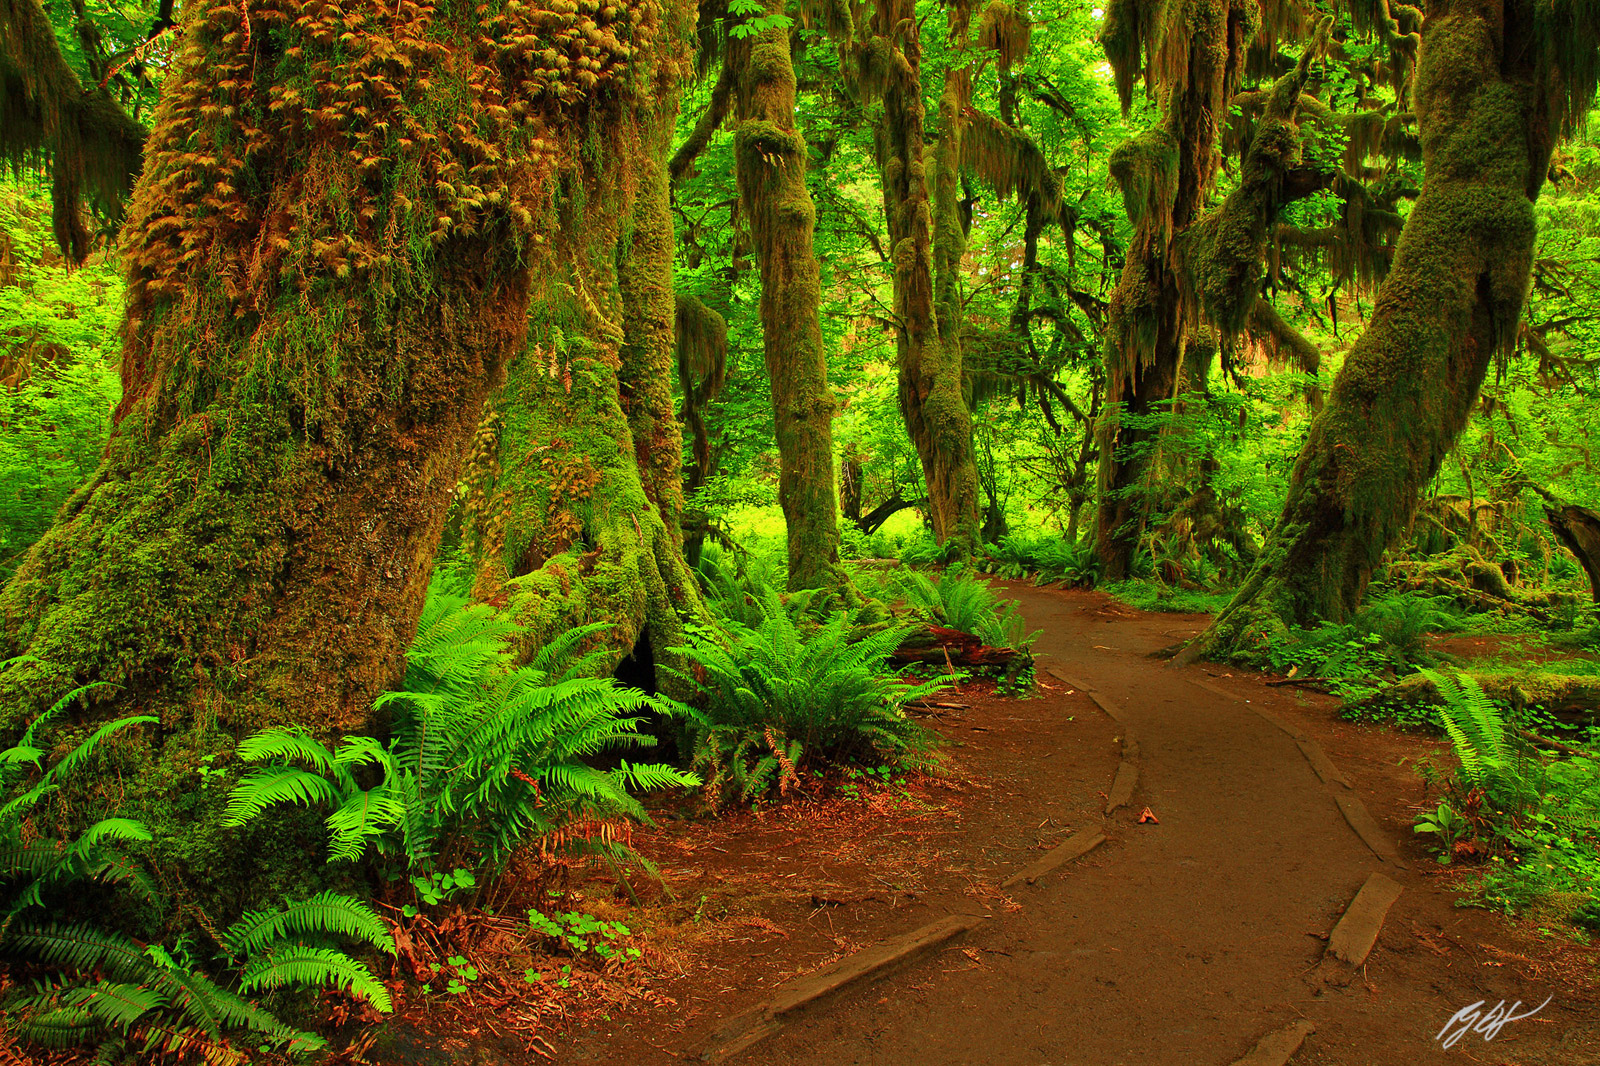 Hall of Mosses Trail in the Hoh Rainforest in Olympic National Park in Washington